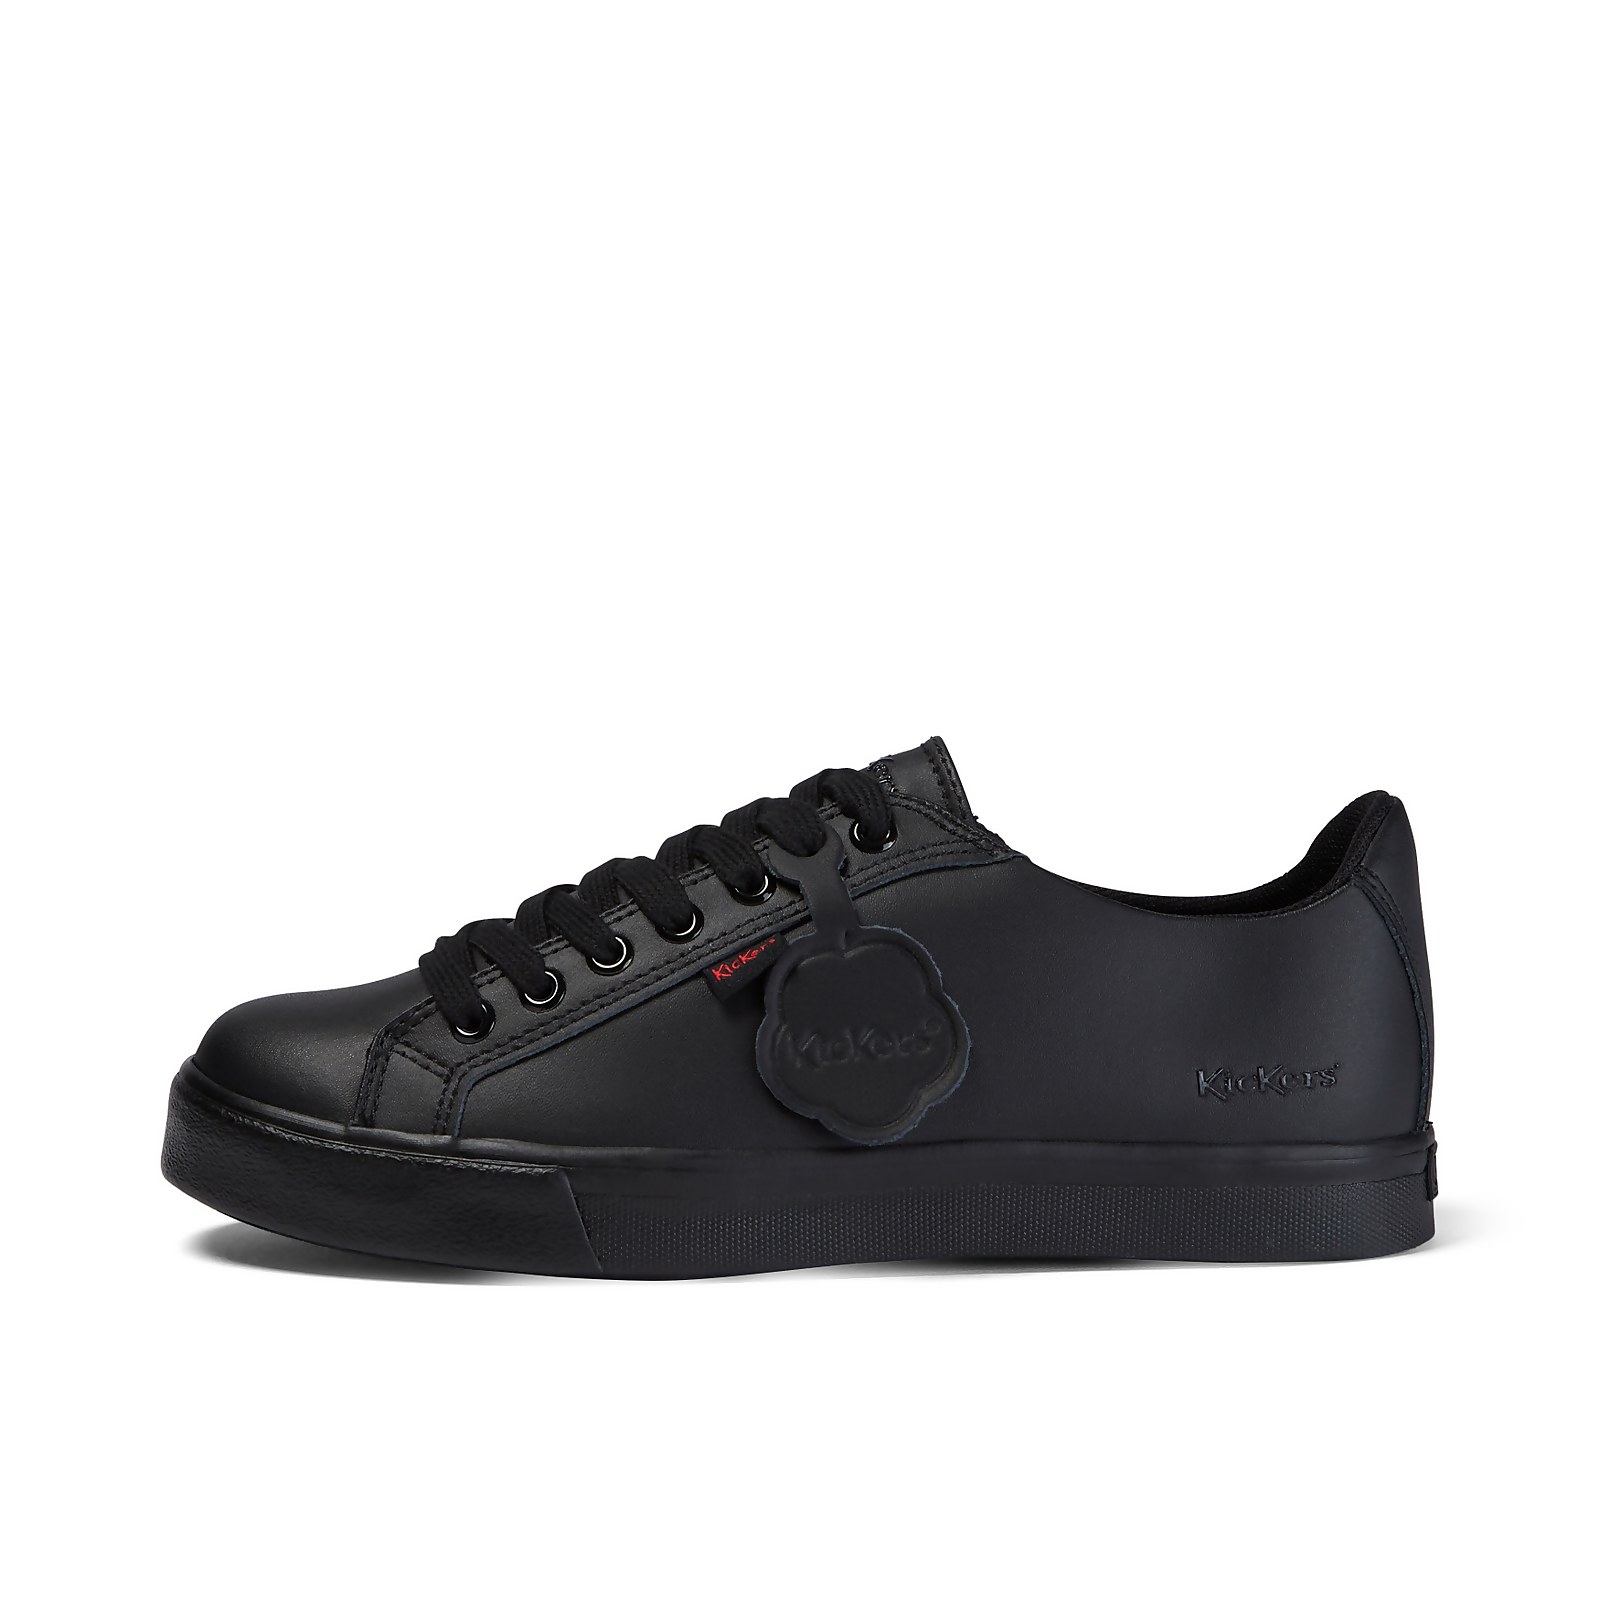 Kickers Youth Tovni Lacer Leather Shoes - Black - 4